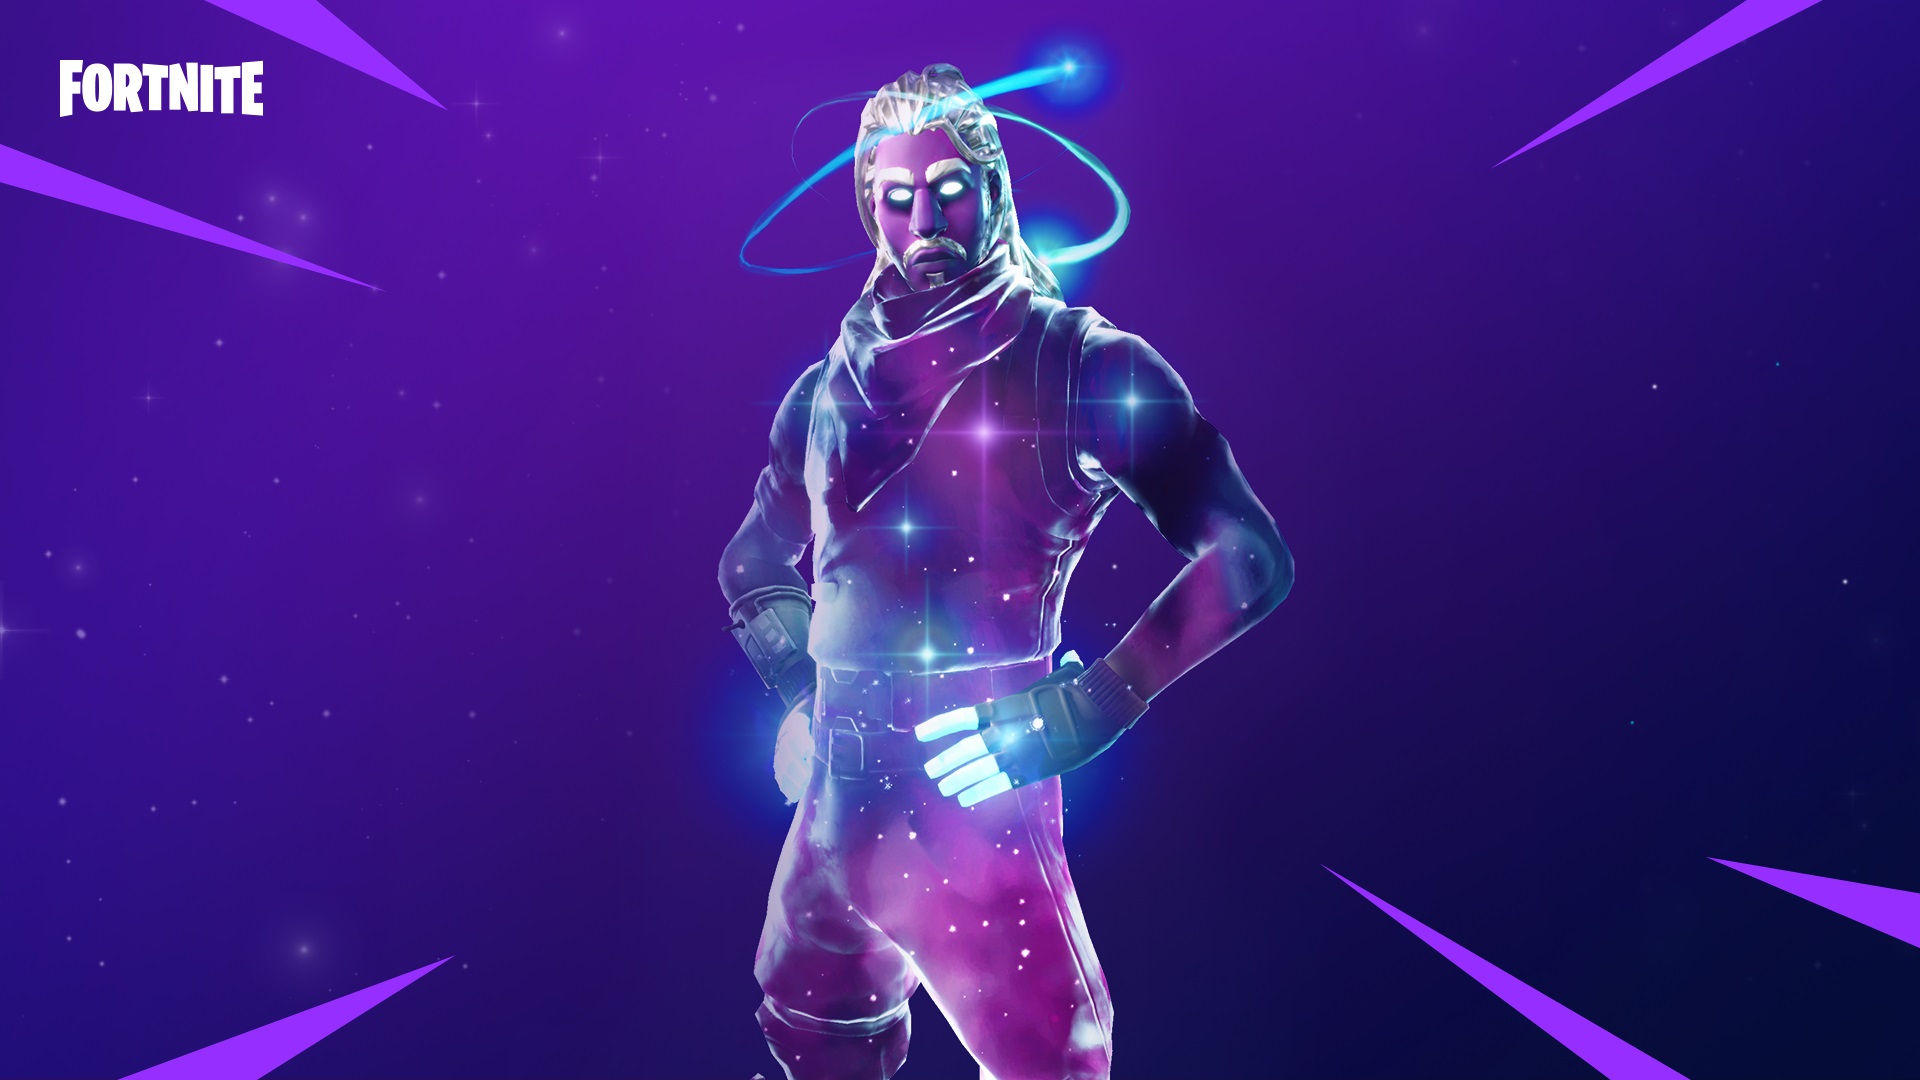 Cheat Code Fortnite Players Found A Dirty Workaround For The Note 9 - cheat code fortnite players found a dirty workaround for the note 9 exclusive skin